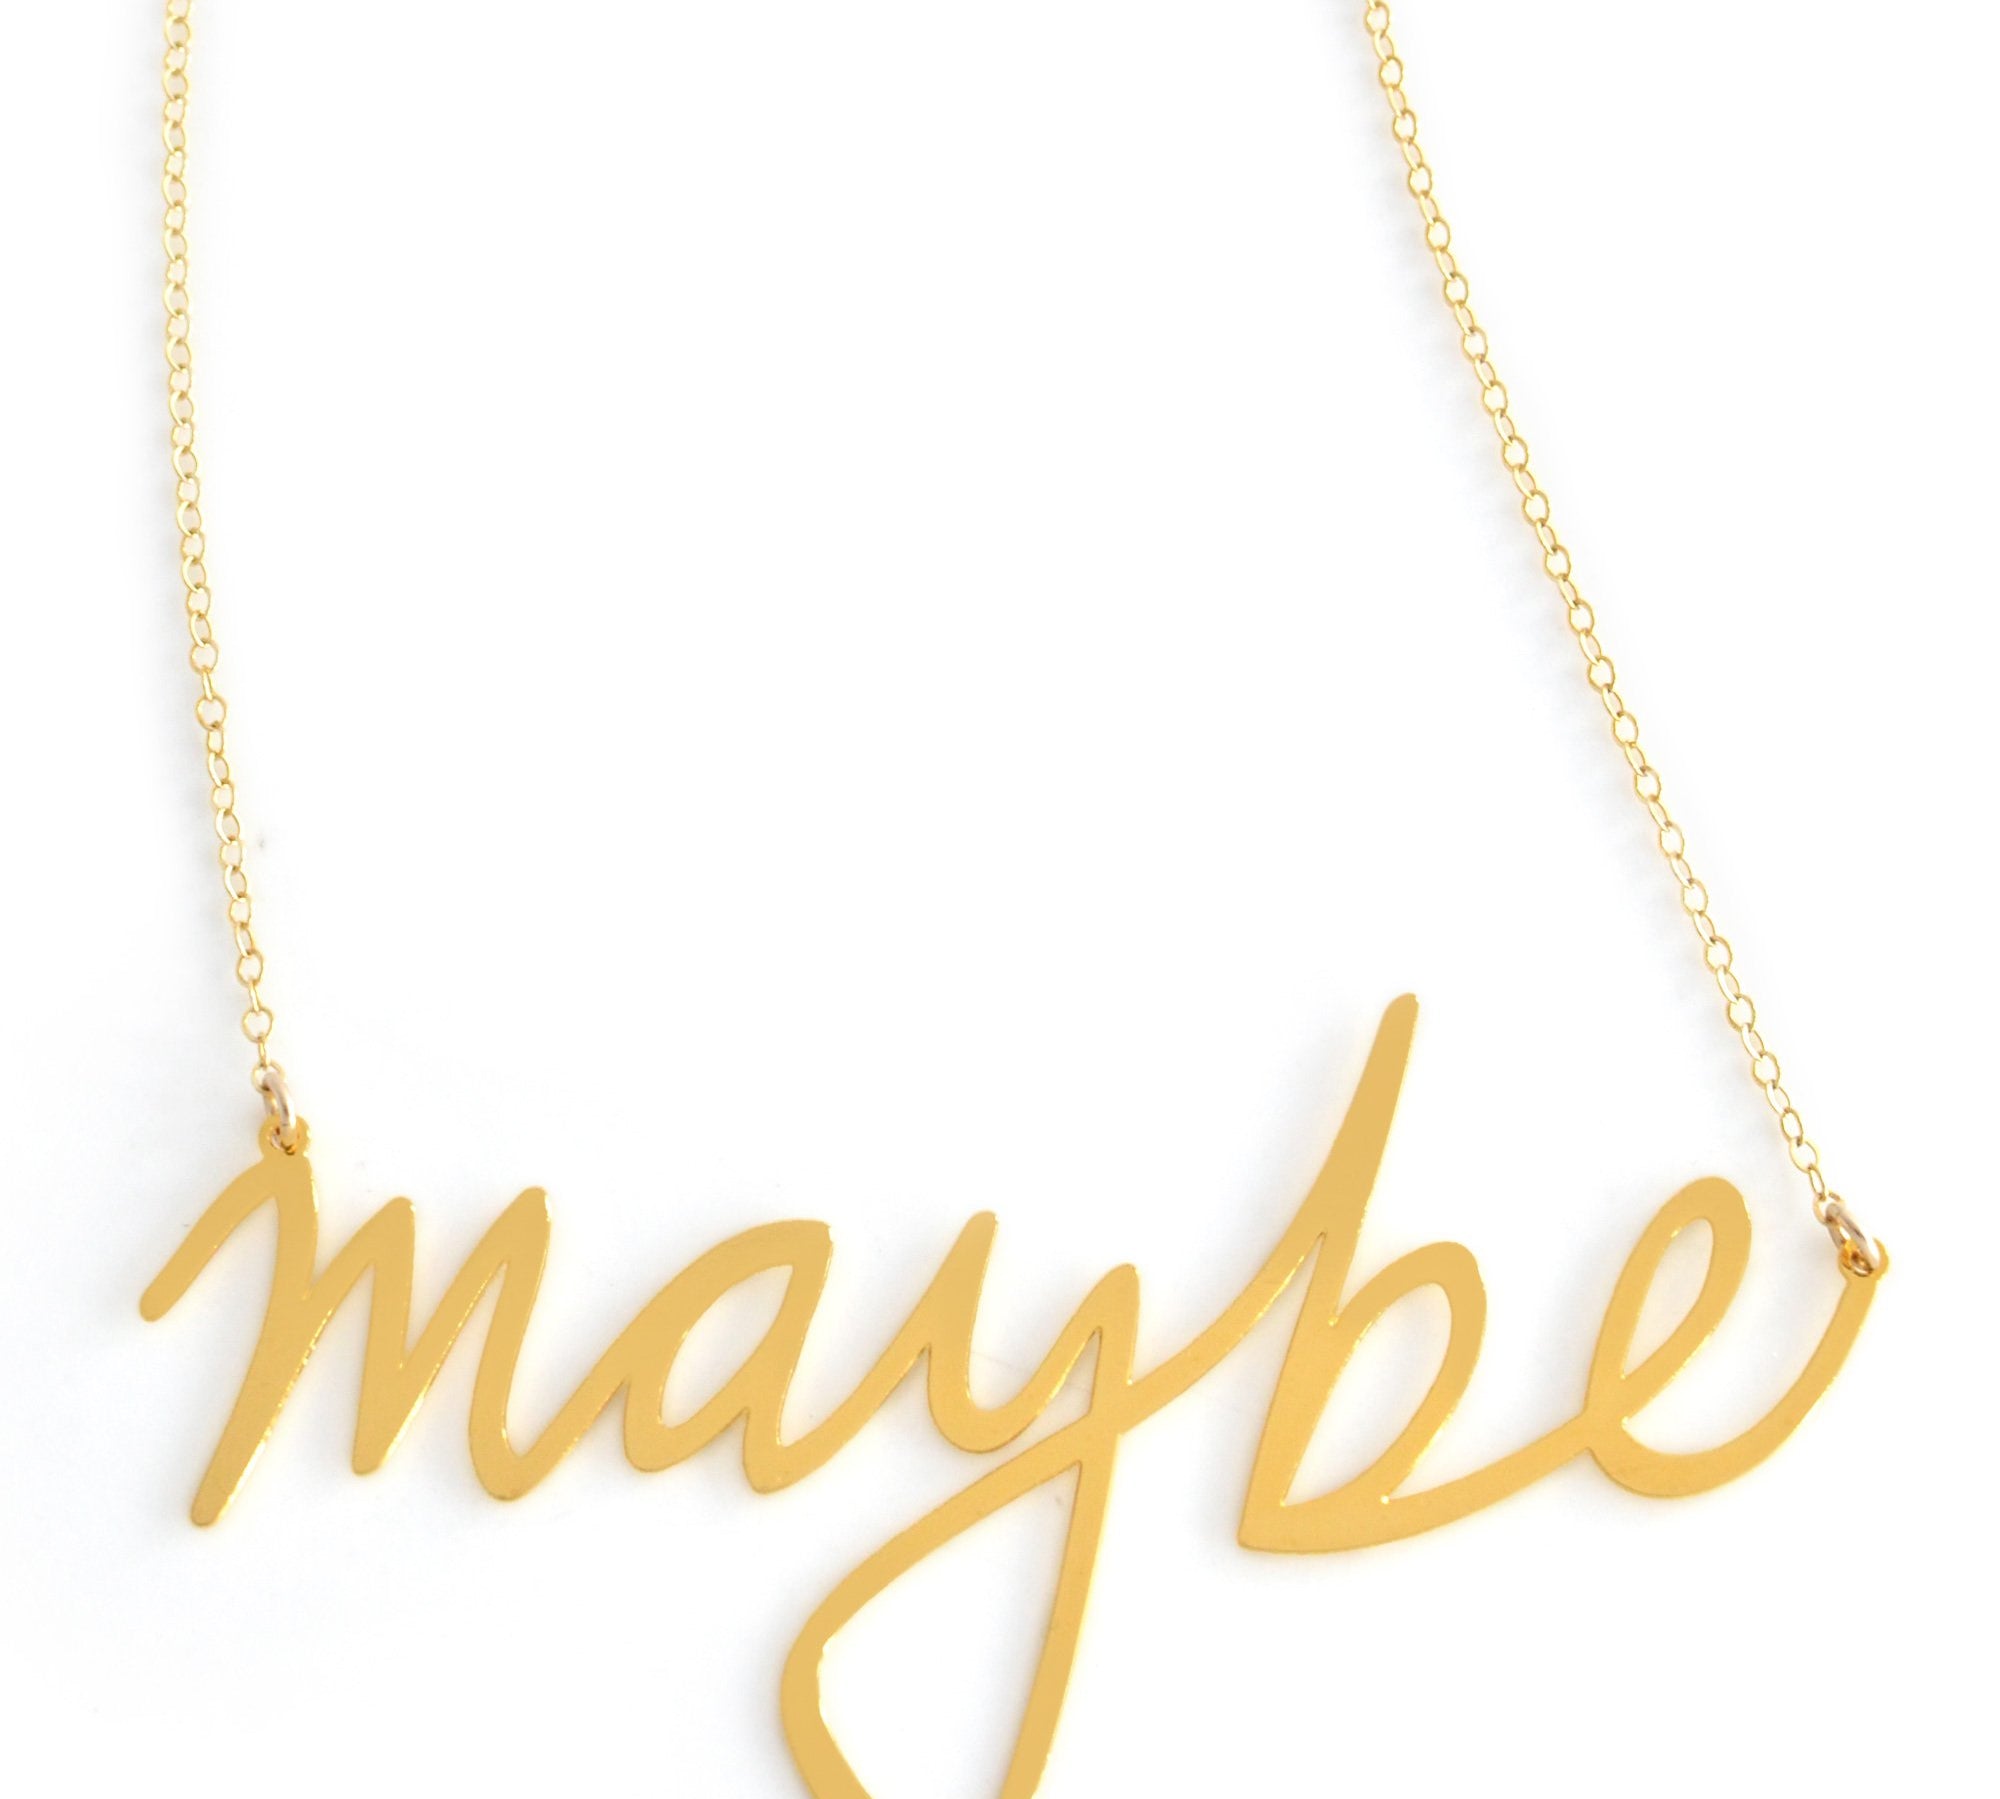 Maybe Necklace - High Quality, Affordable, Hand Written, Self Love, Mantra Word Necklace - Available in Gold and Silver - Small and Large Sizes - Made in USA - Brevity Jewelry